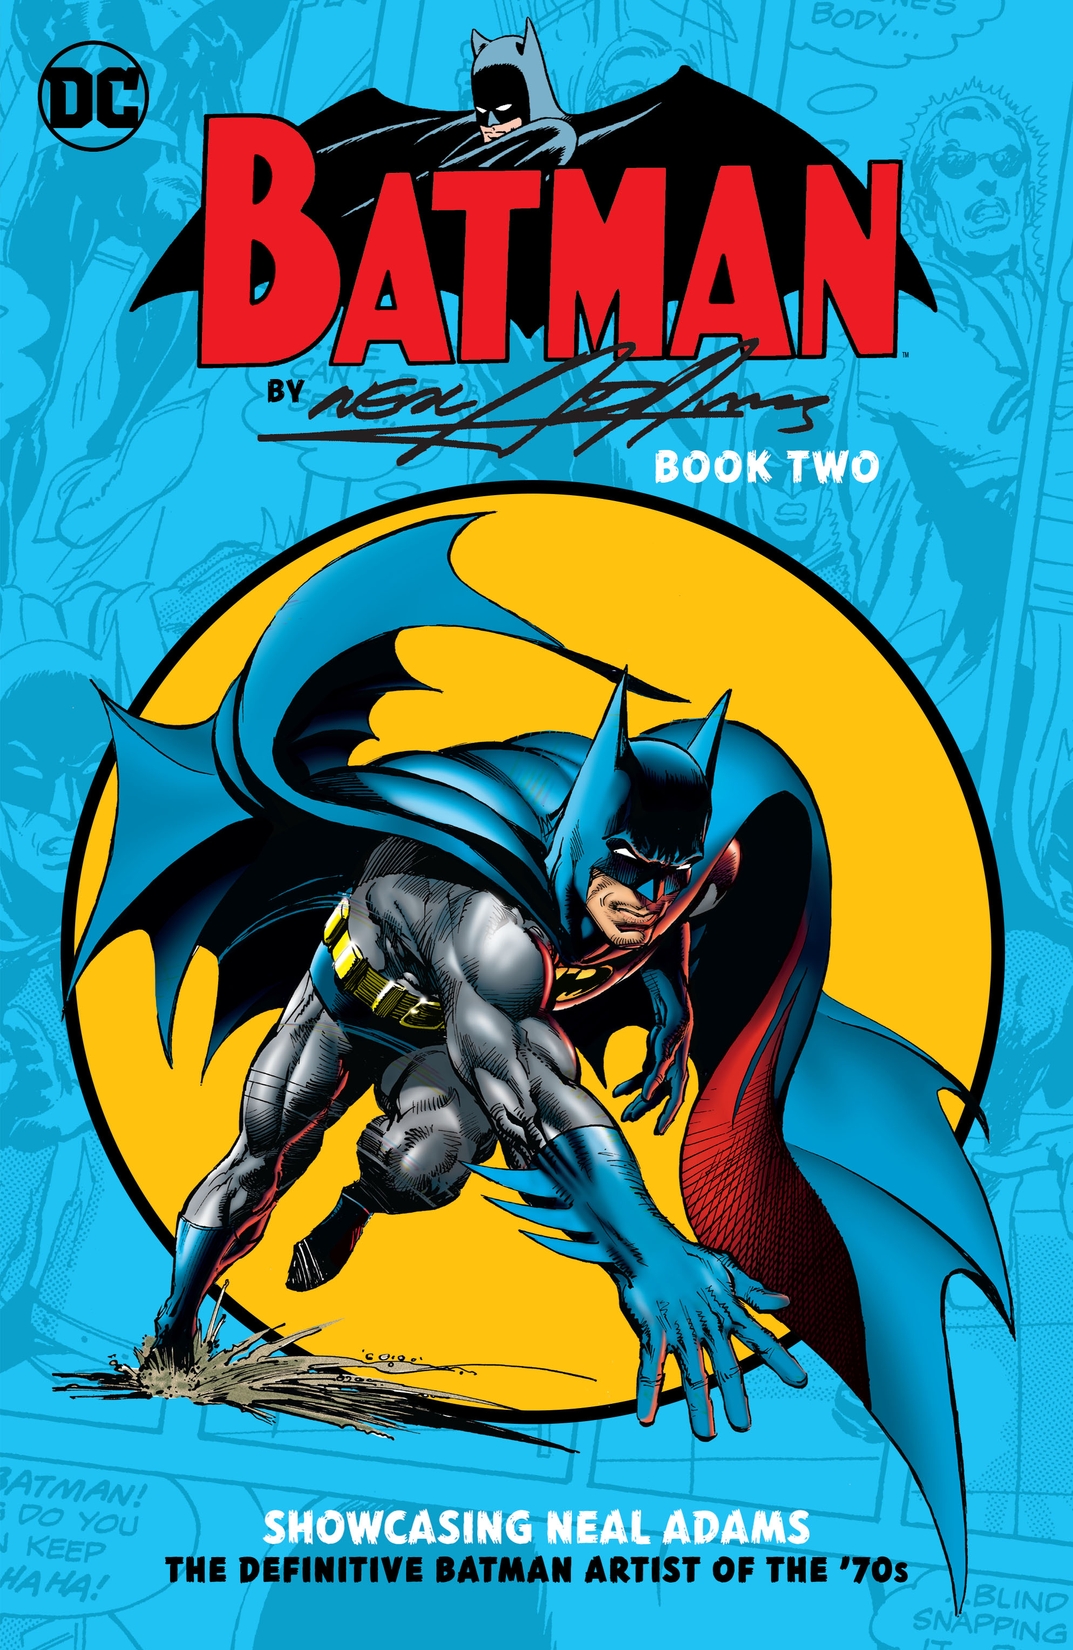 Batman by Neal Adams Book Two preview images